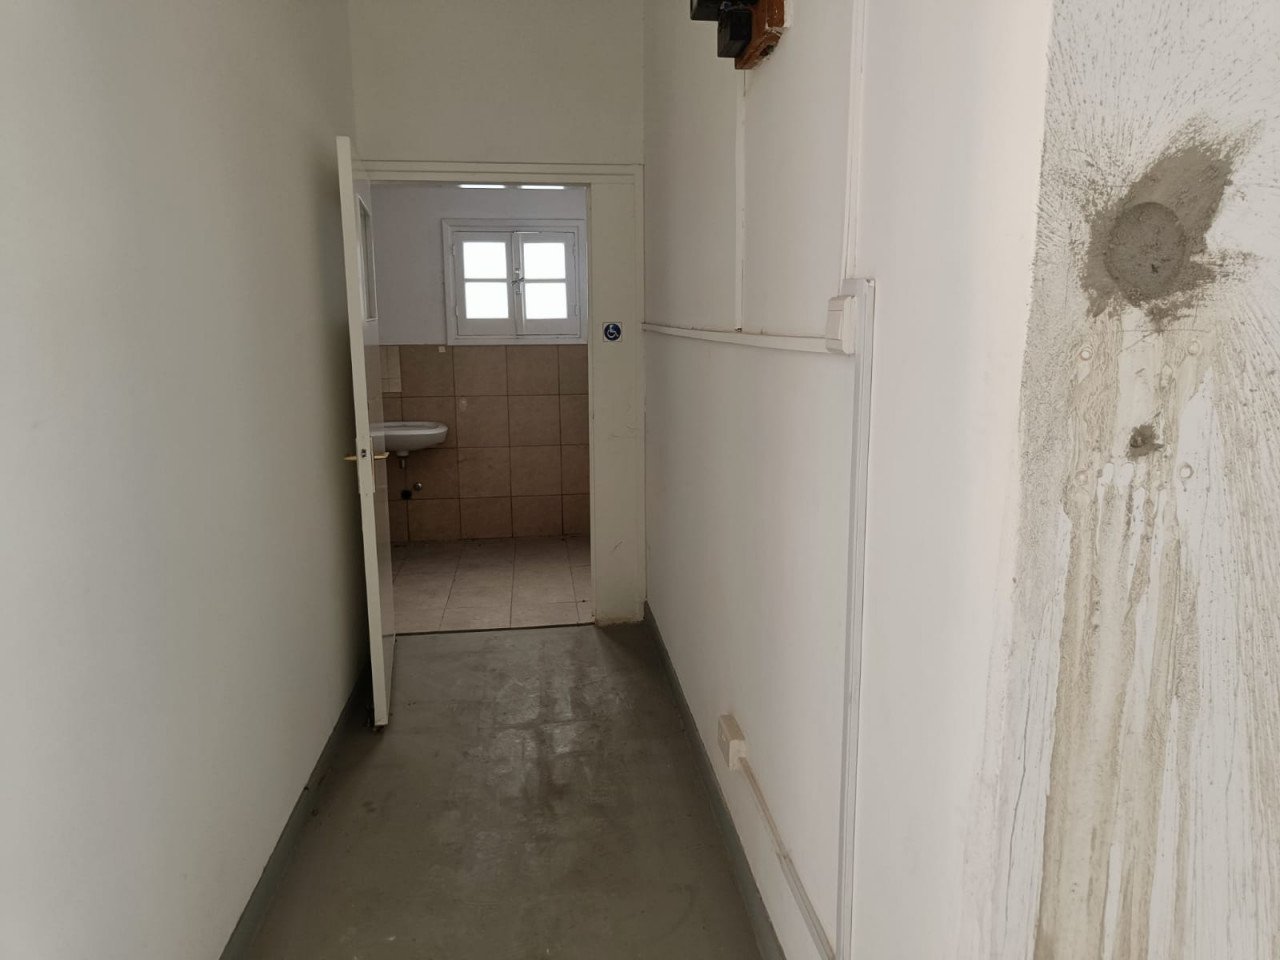 Property for Rent: Commercial (Building) in City Area, Nicosia for Rent | Key Realtor Cyprus